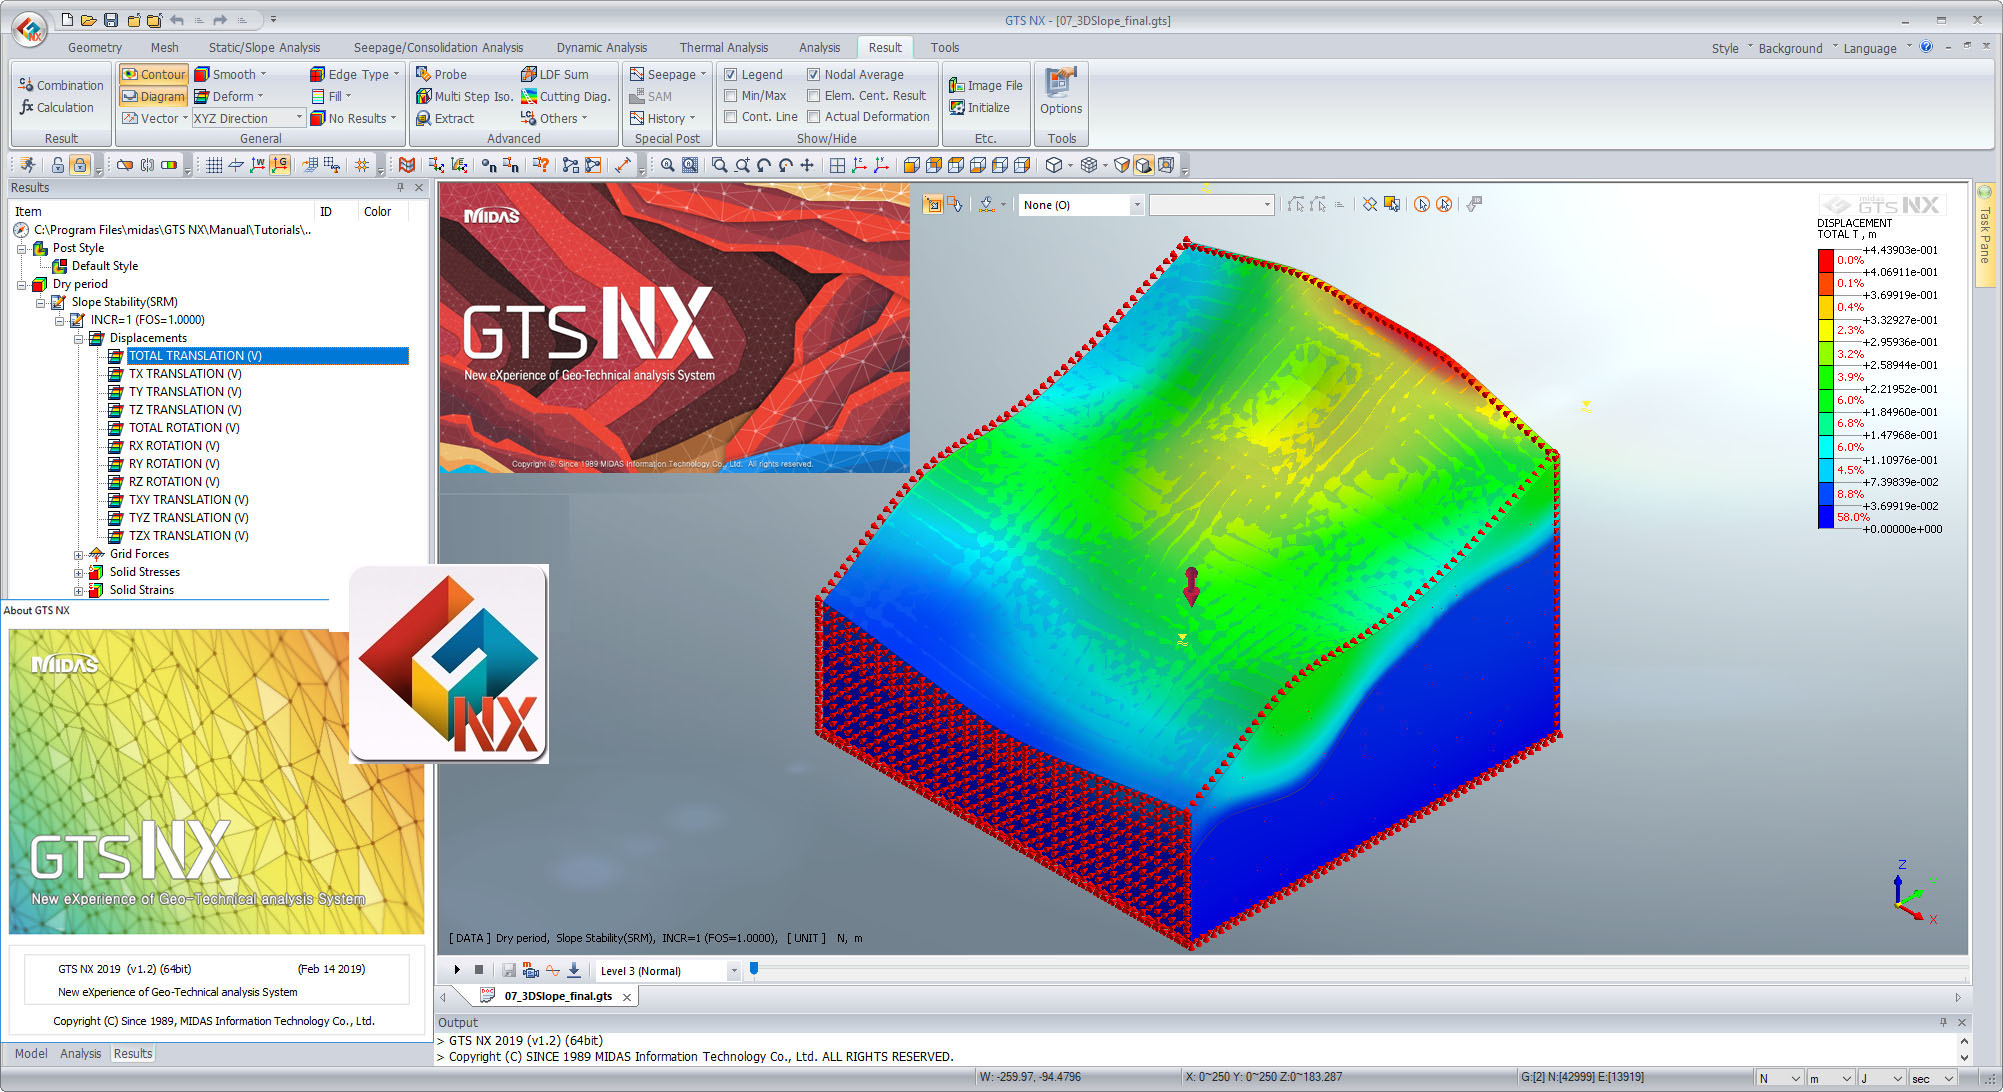 Working with GTS NX 2019 v1.2 full license